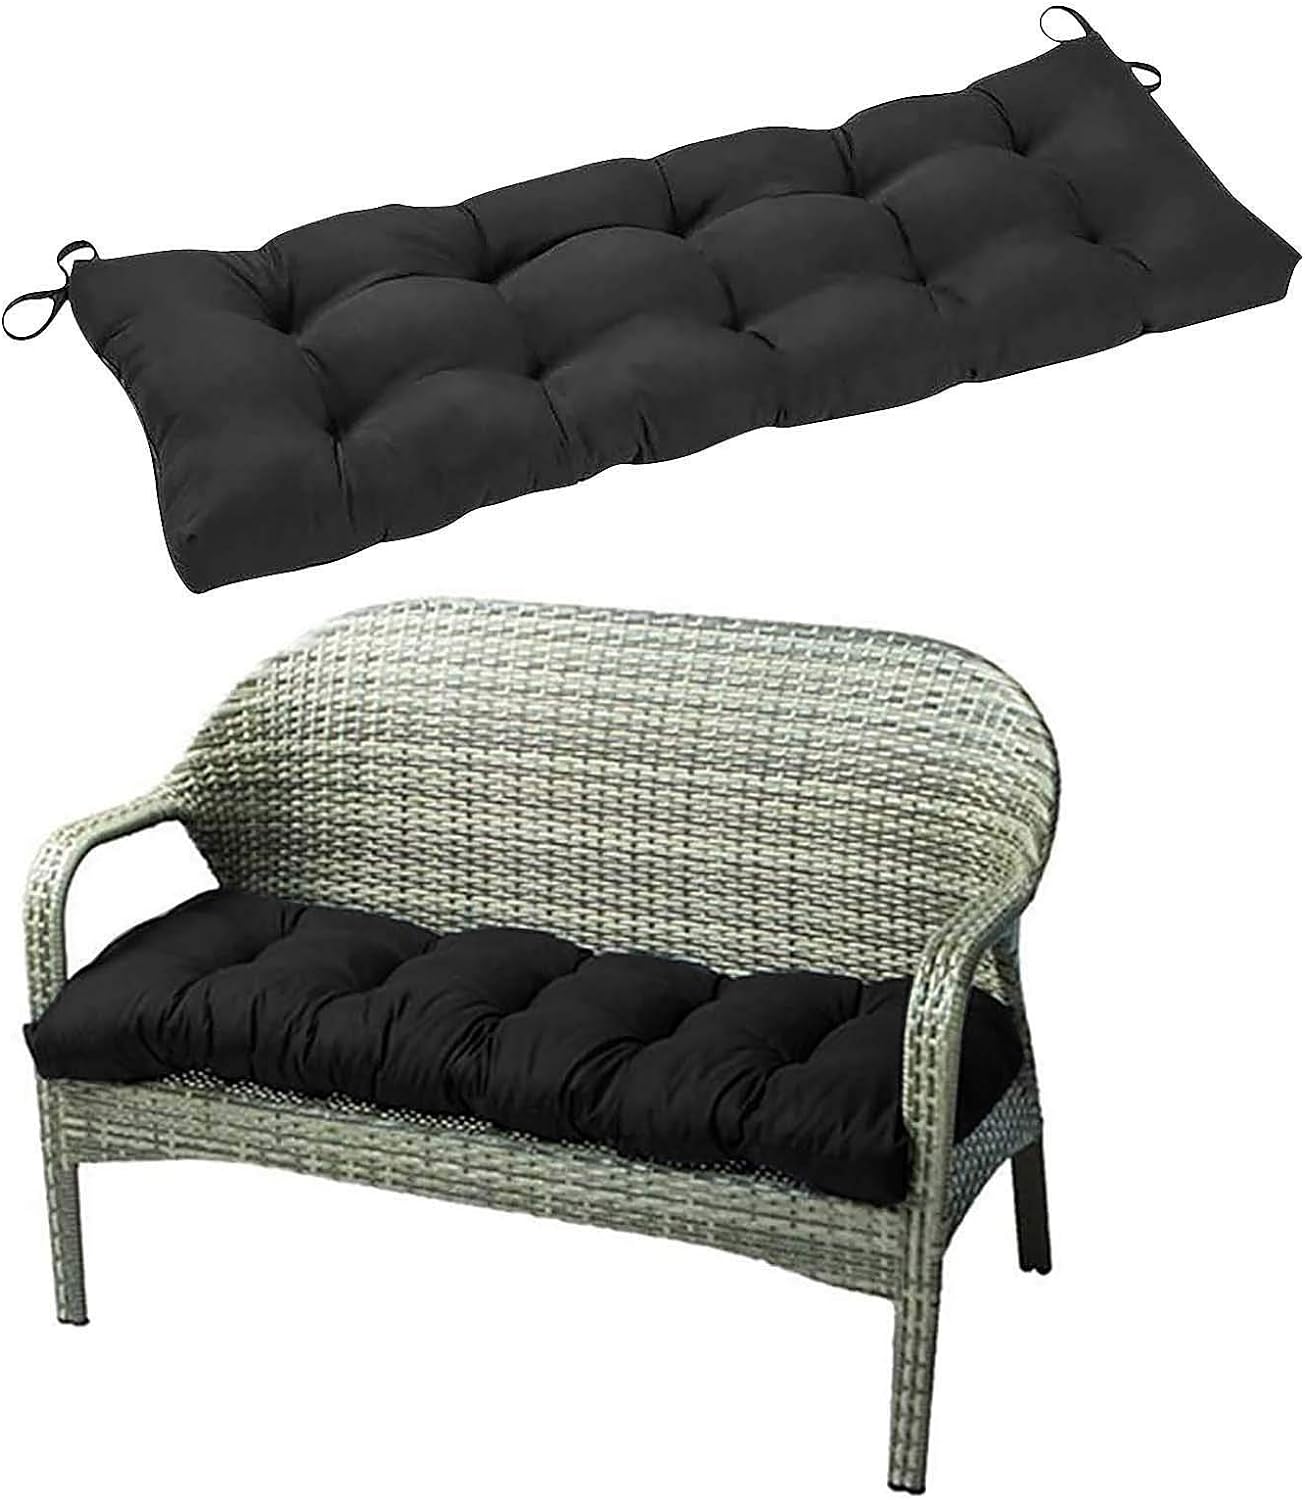 Bench Cushions On Clearance, Patio Bench Cushions On Clearance